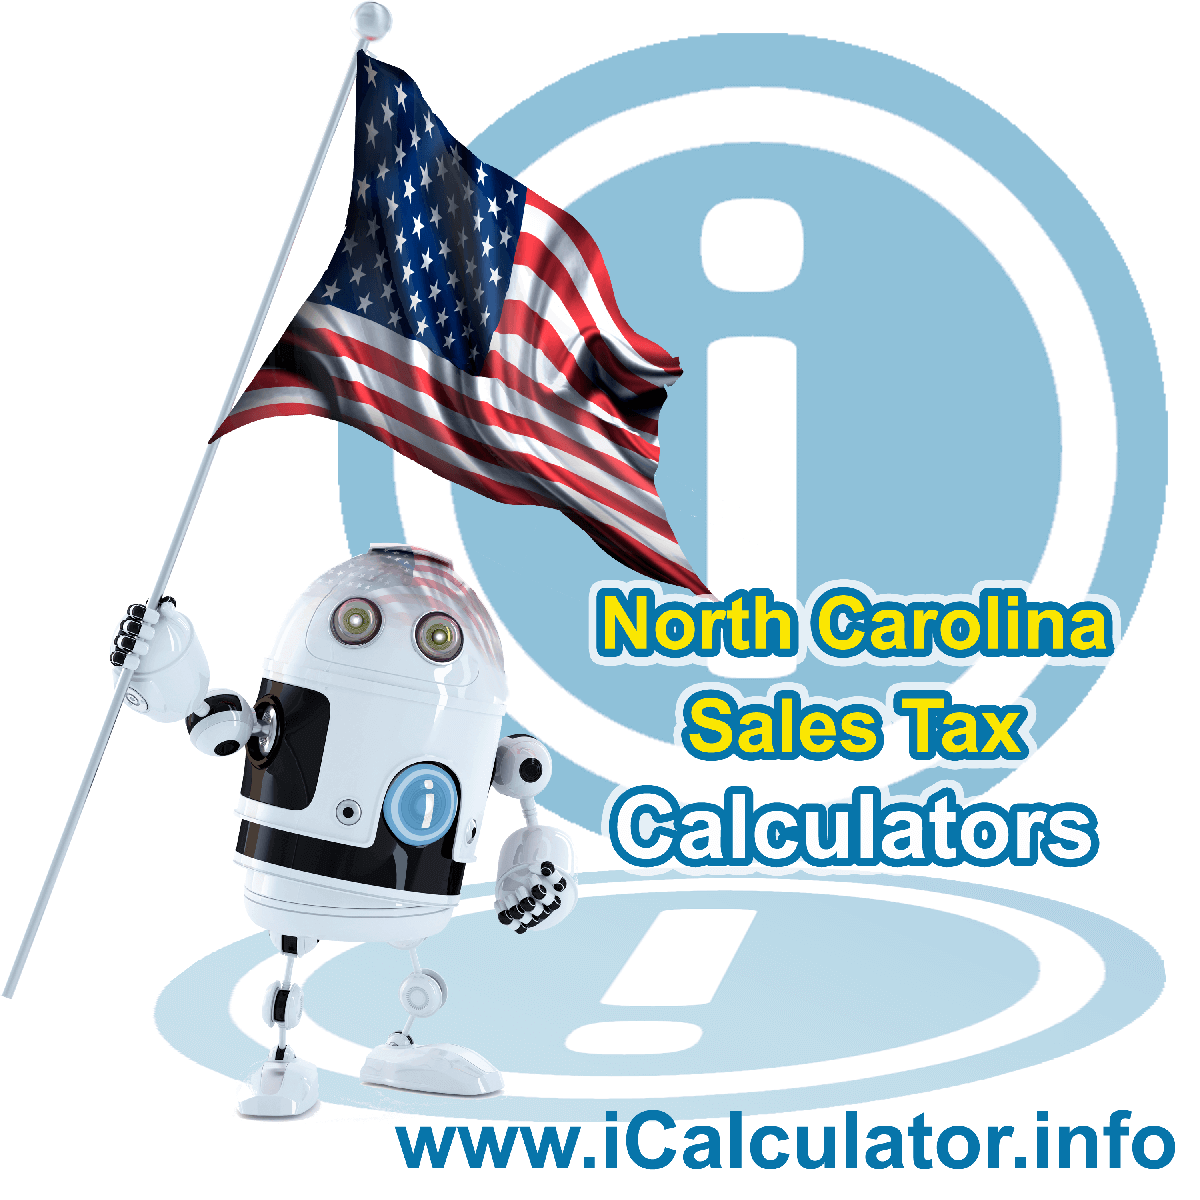 Wake County Sales Rates: This image illustrates a calculator robot calculating Wake County sales tax manually using the Wake County Sales Tax Formula. You can use this information to calculate Wake County Sales Tax manually or use the Wake County Sales Tax Calculator to calculate sales tax online.